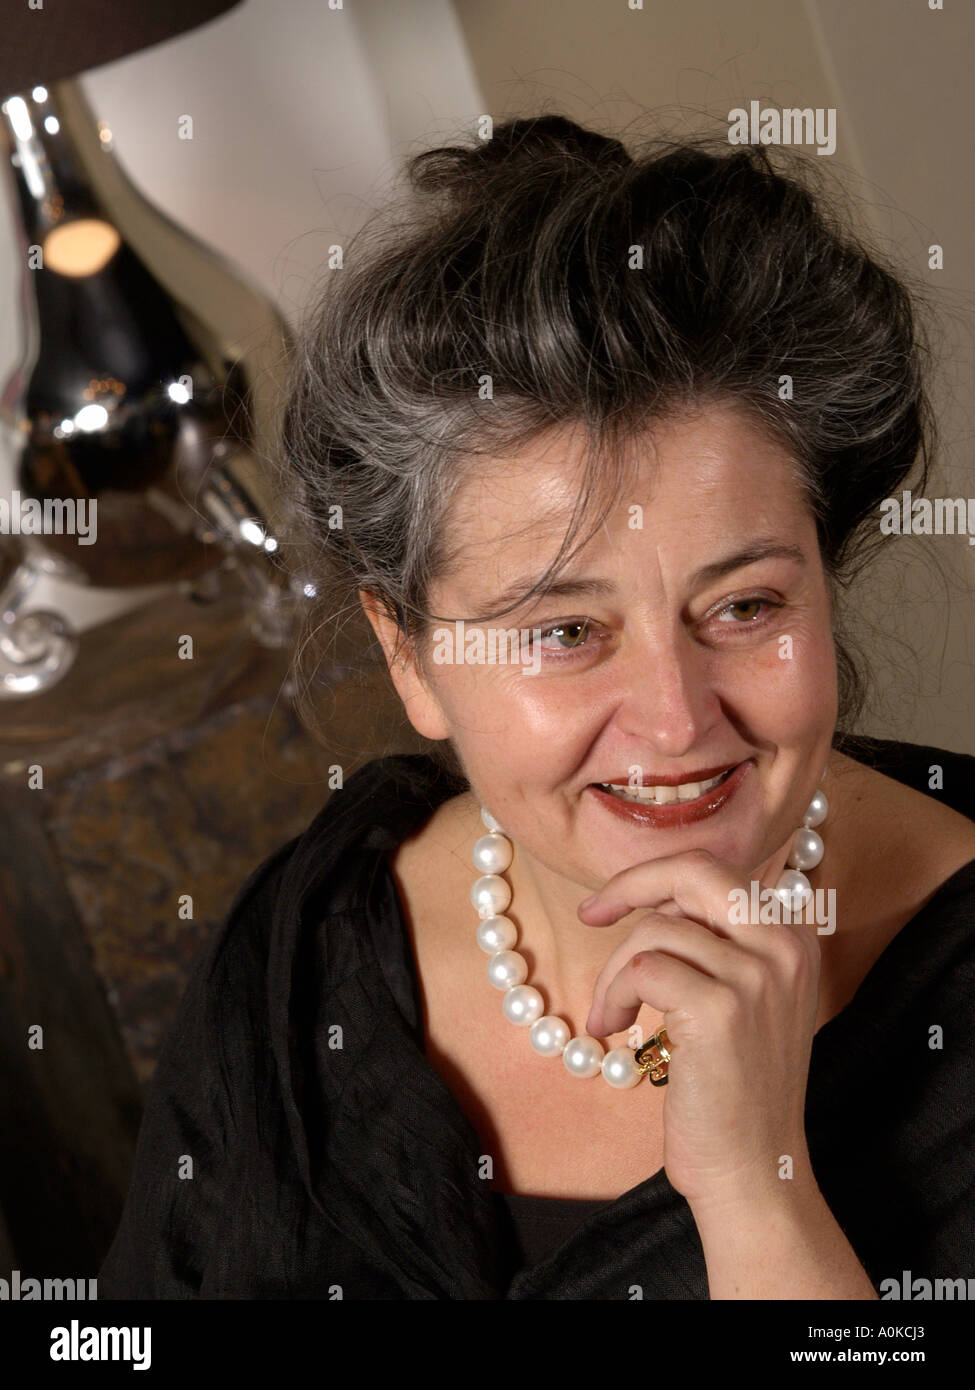 portrait of Mrs Maroeska Metz a famous Dutch designer artist The lamp in the background and the necklace are her own designs Stock Photo